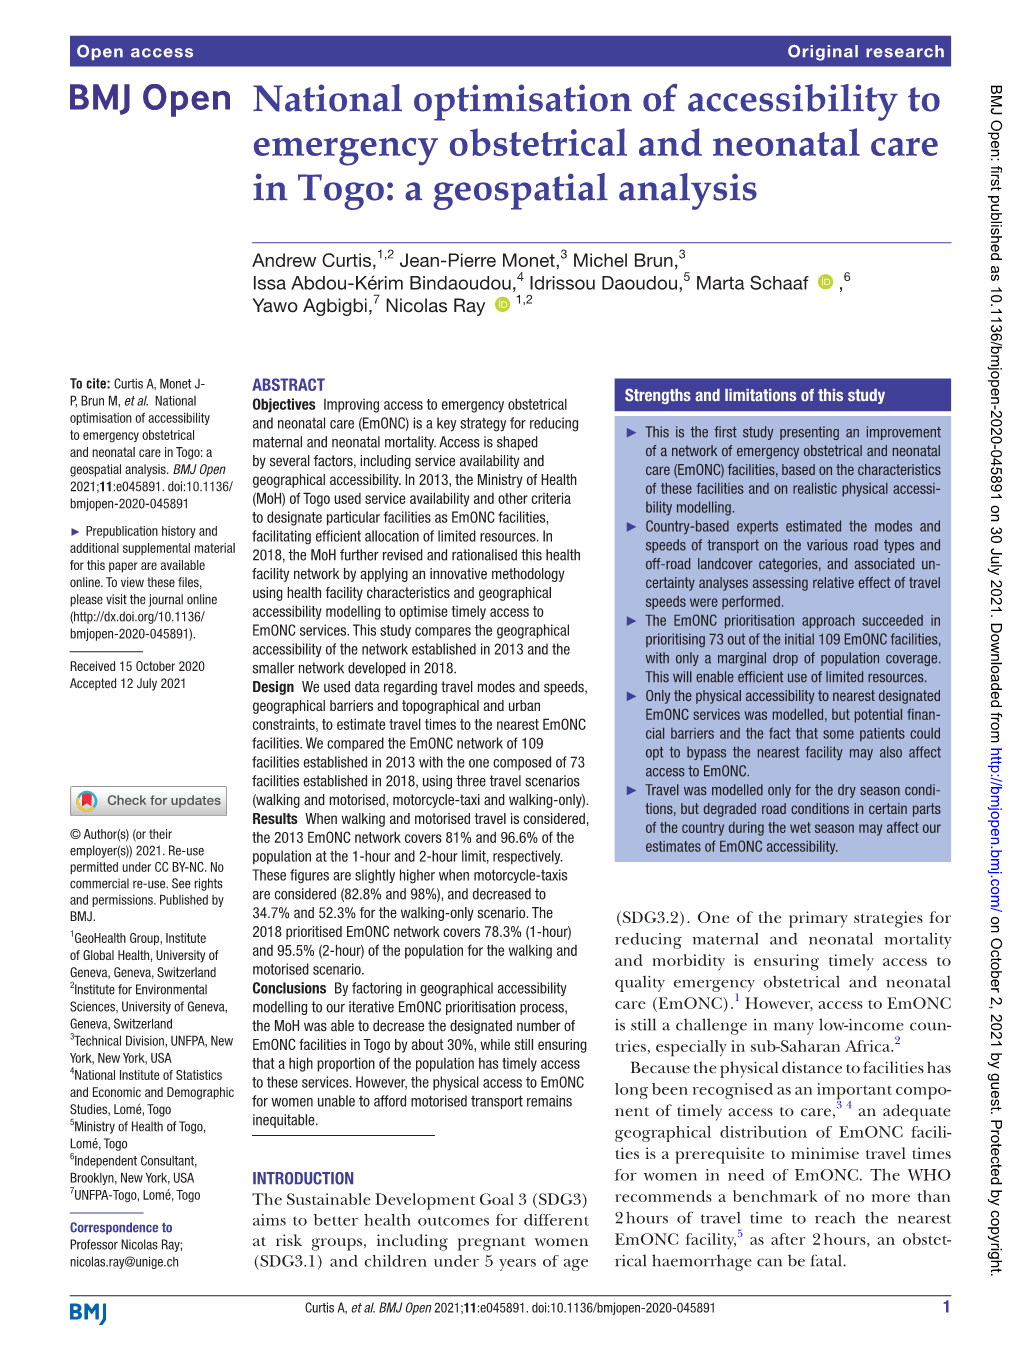 National Optimisation of Accessibility to Emergency Obstetrical and Neonatal Care in Togo: a Geospatial Analysis